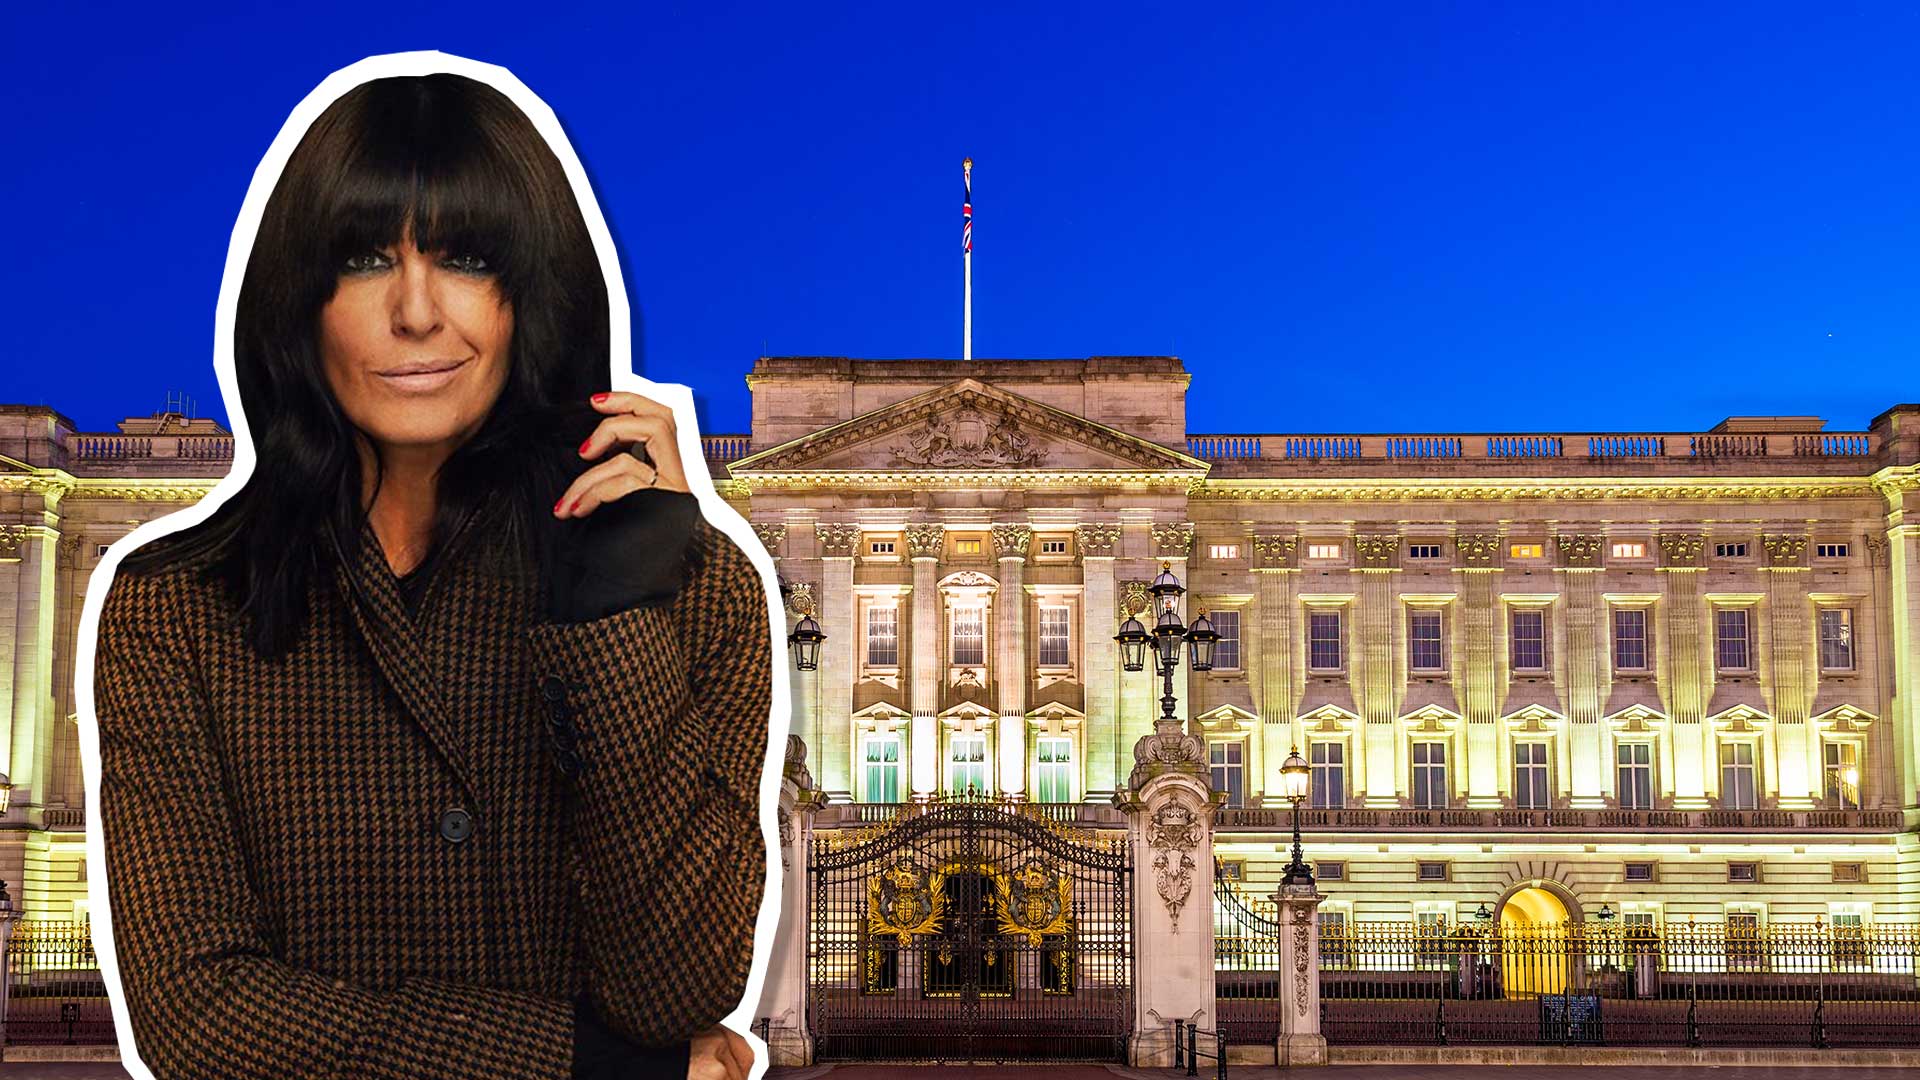 Claudia Winkleman in front of Buckingham Palace